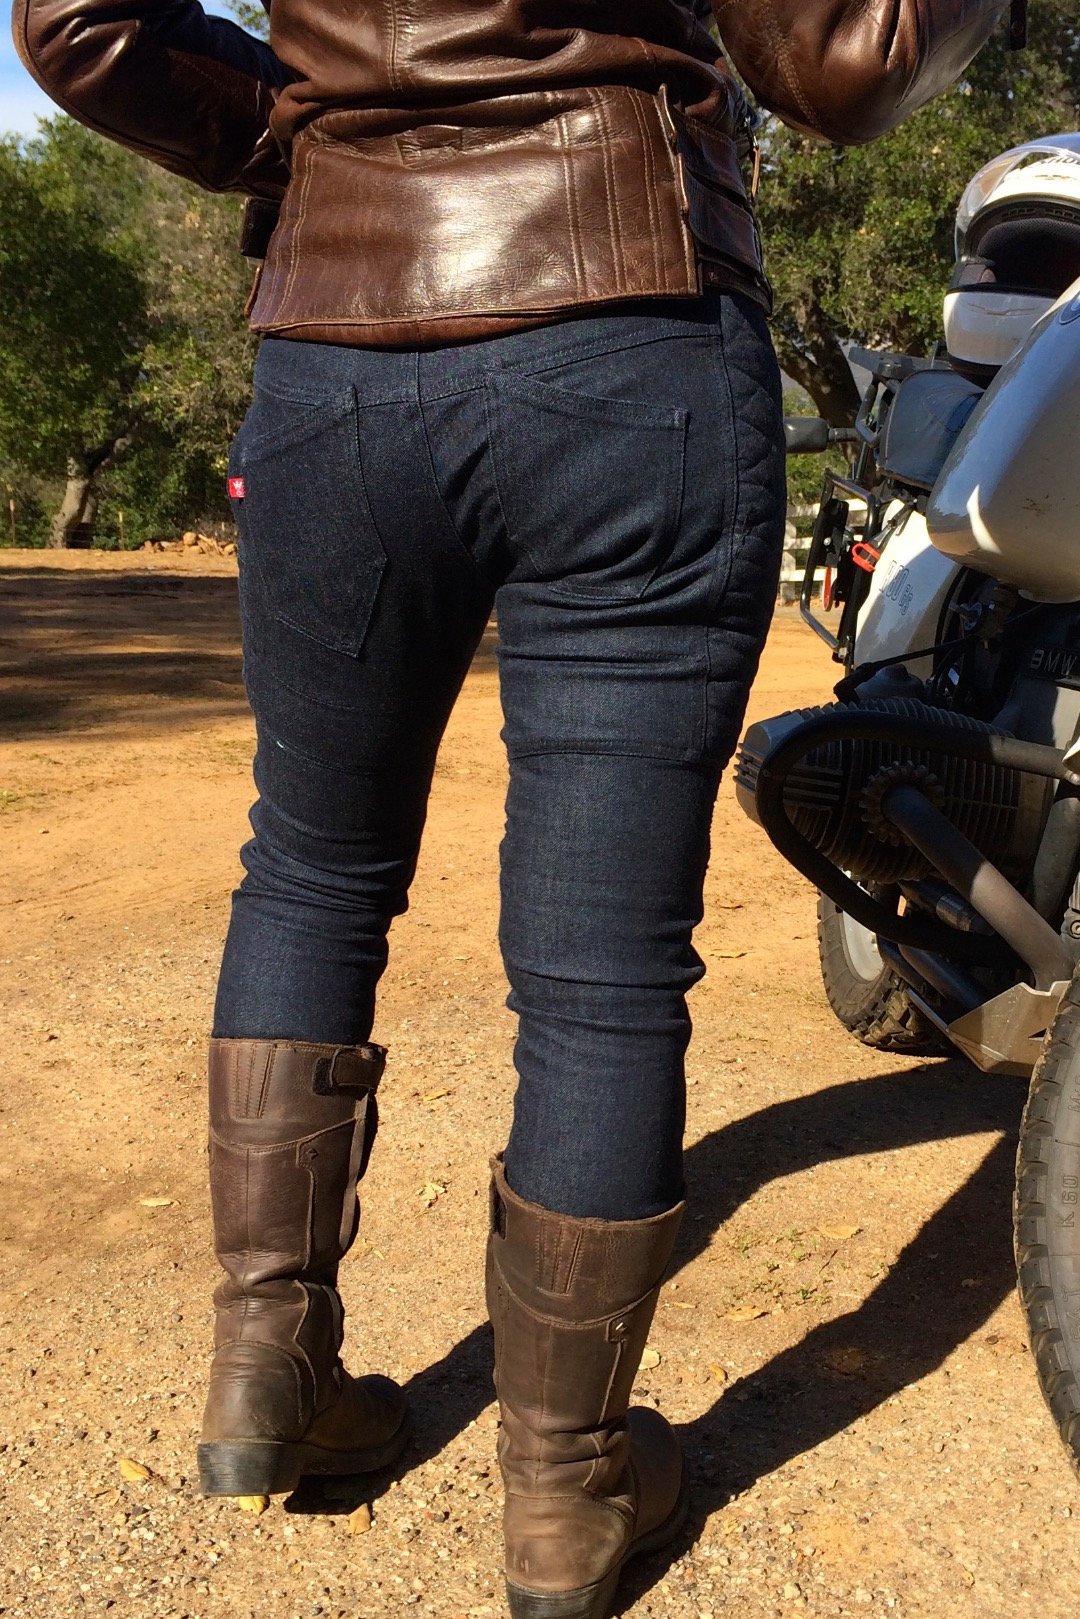 Pando-Moto-Rosie-womens-motorcycle-jeans-review-3 - GLORIOUS MOTORCYCLES